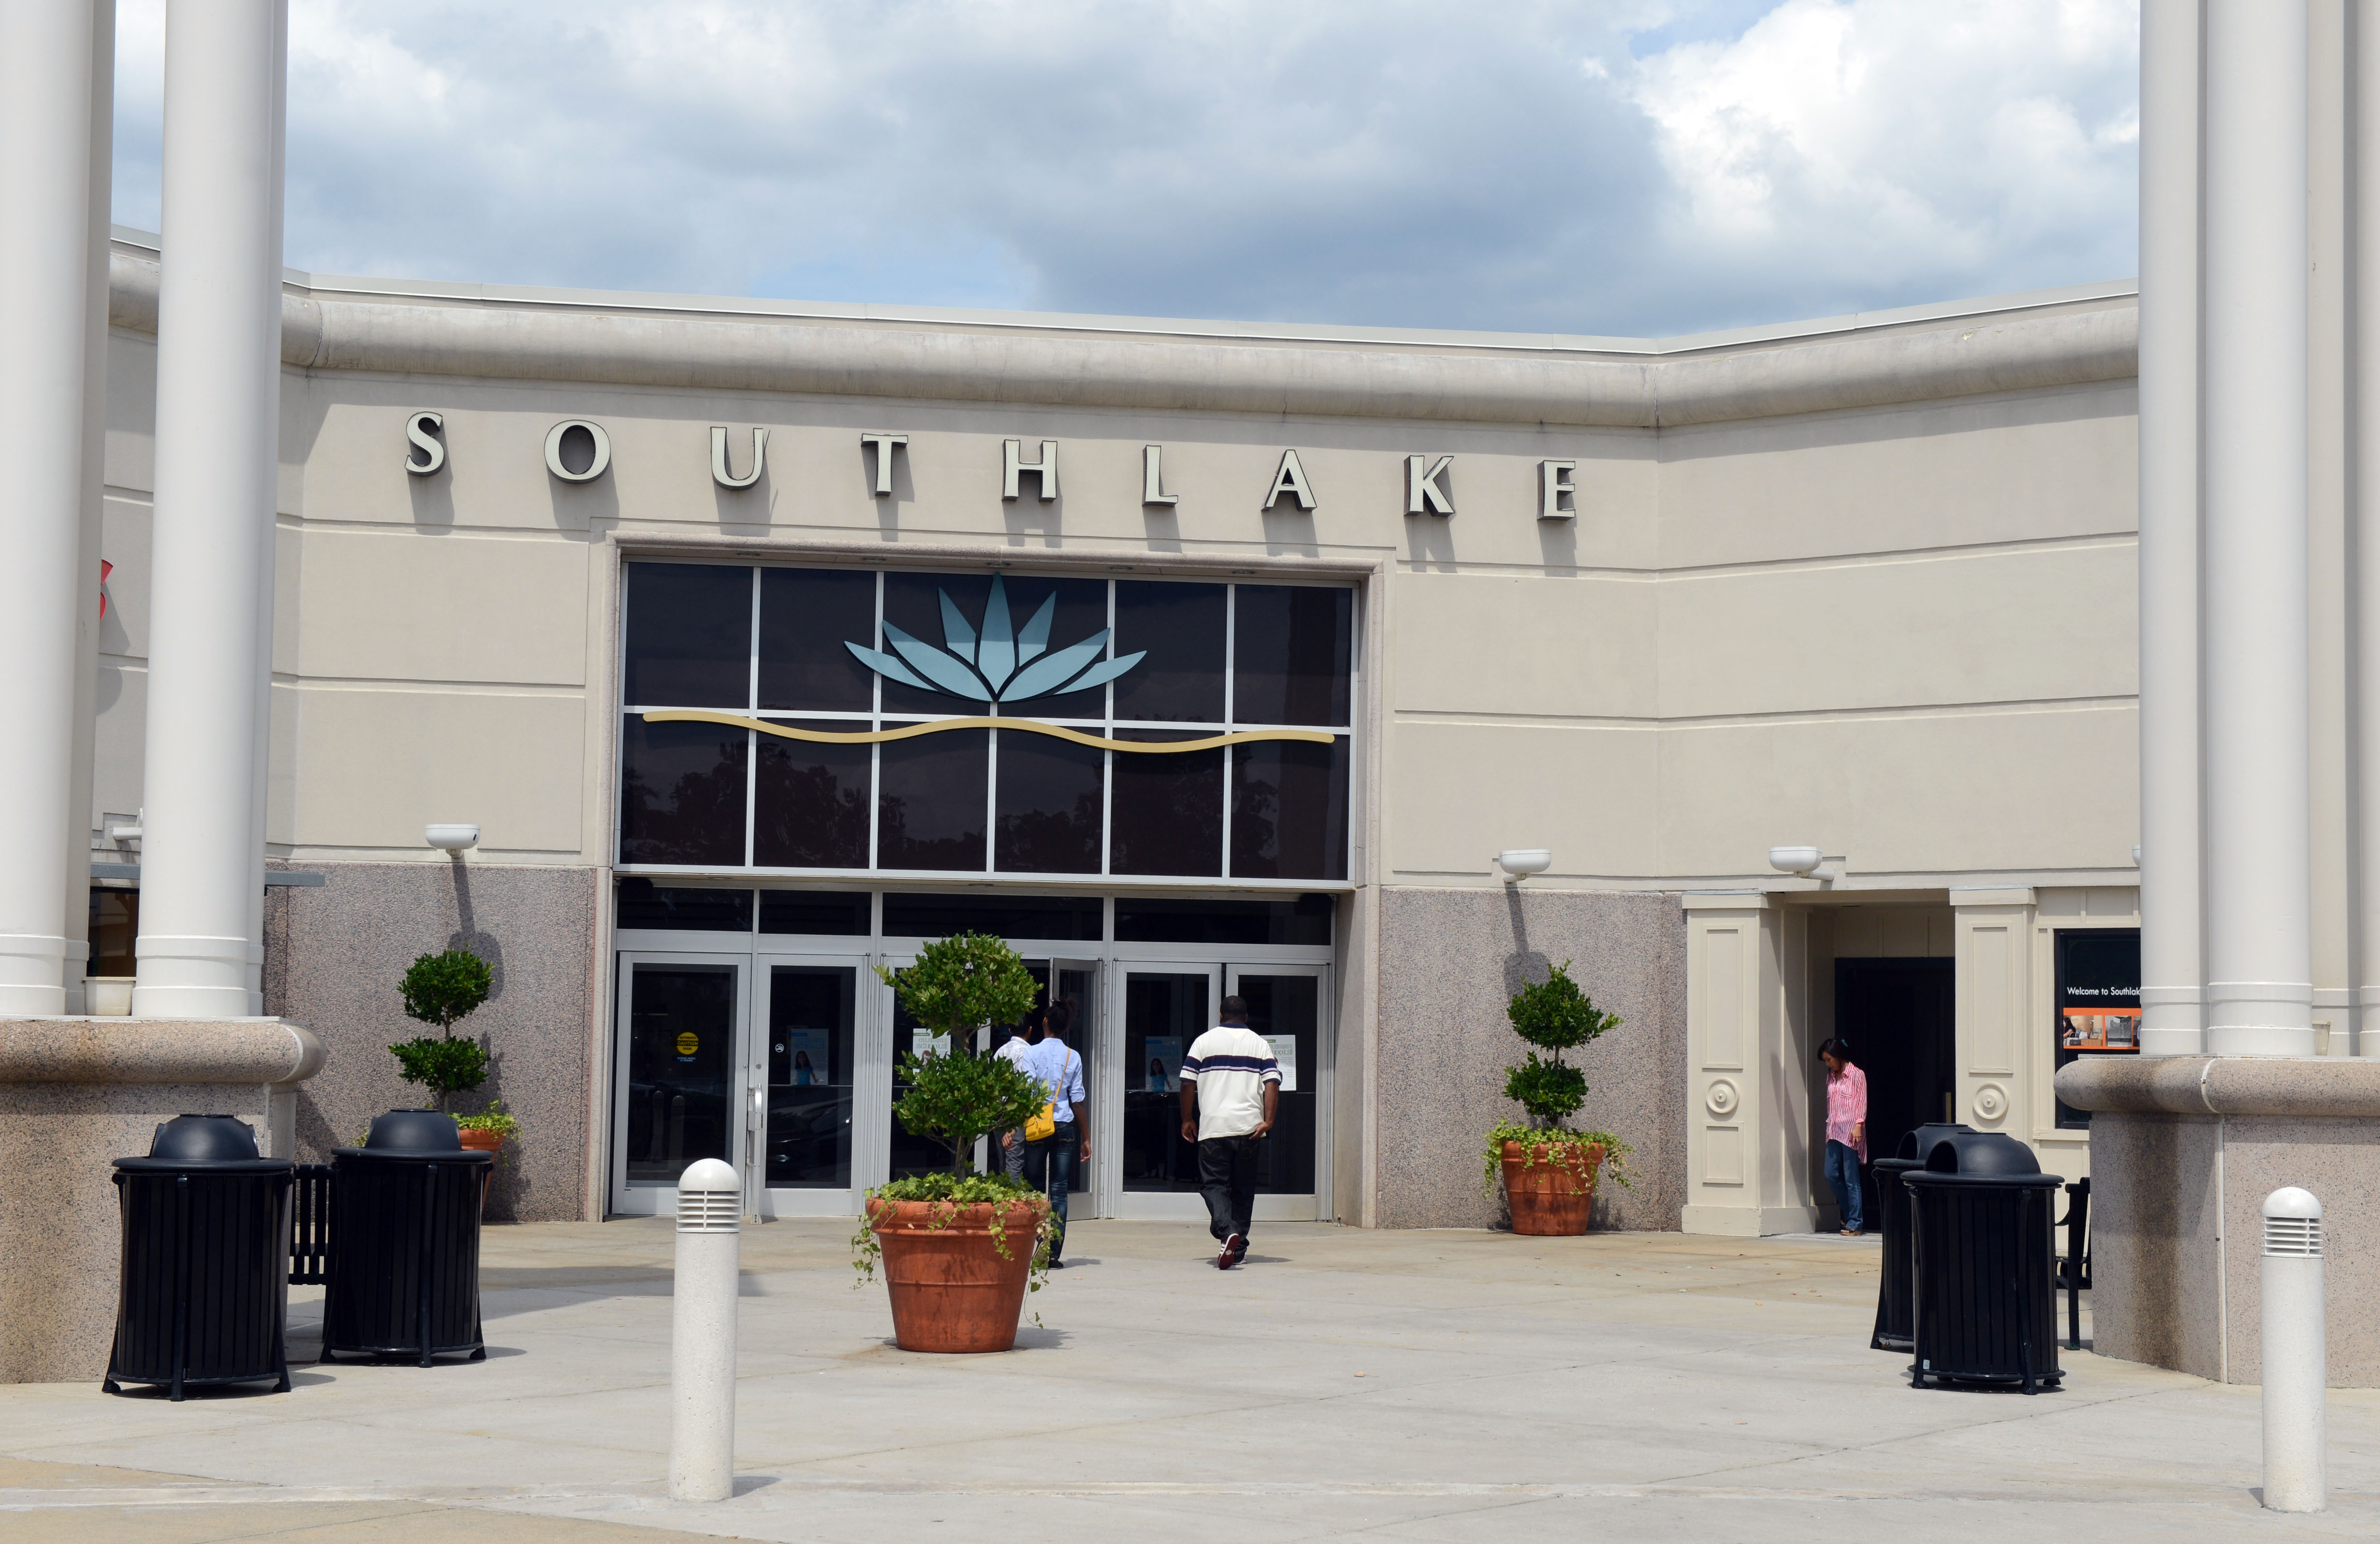 Charter School Buys Former Department Store at Long-Struggling Mall